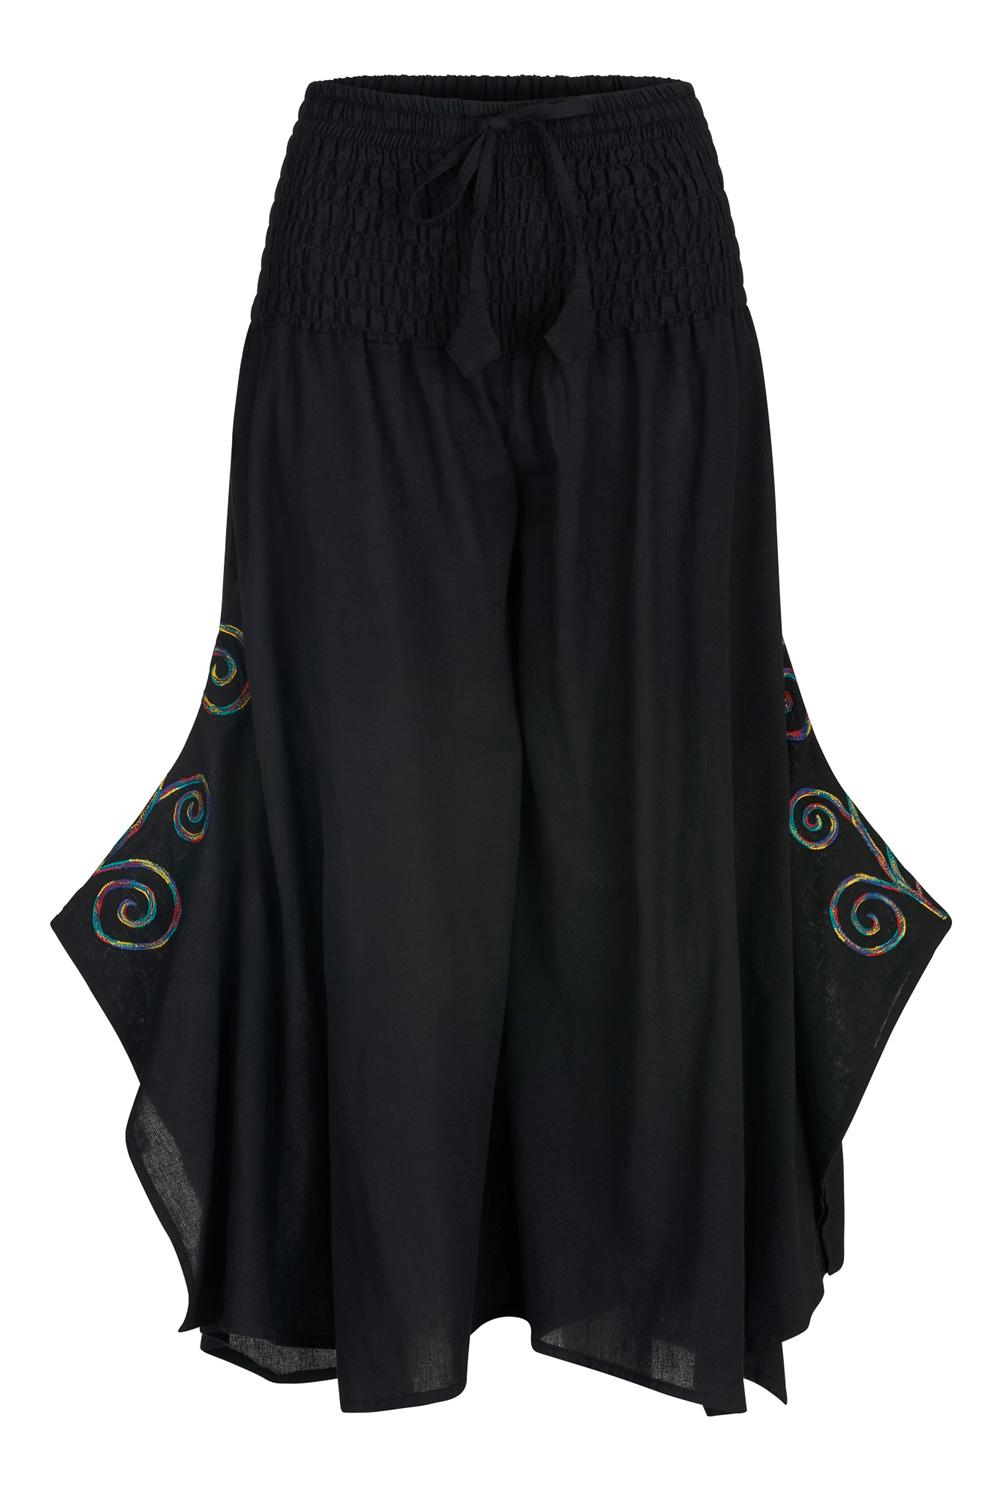 Rainbow swirl palazzo trousers with pockets - L//XL size only